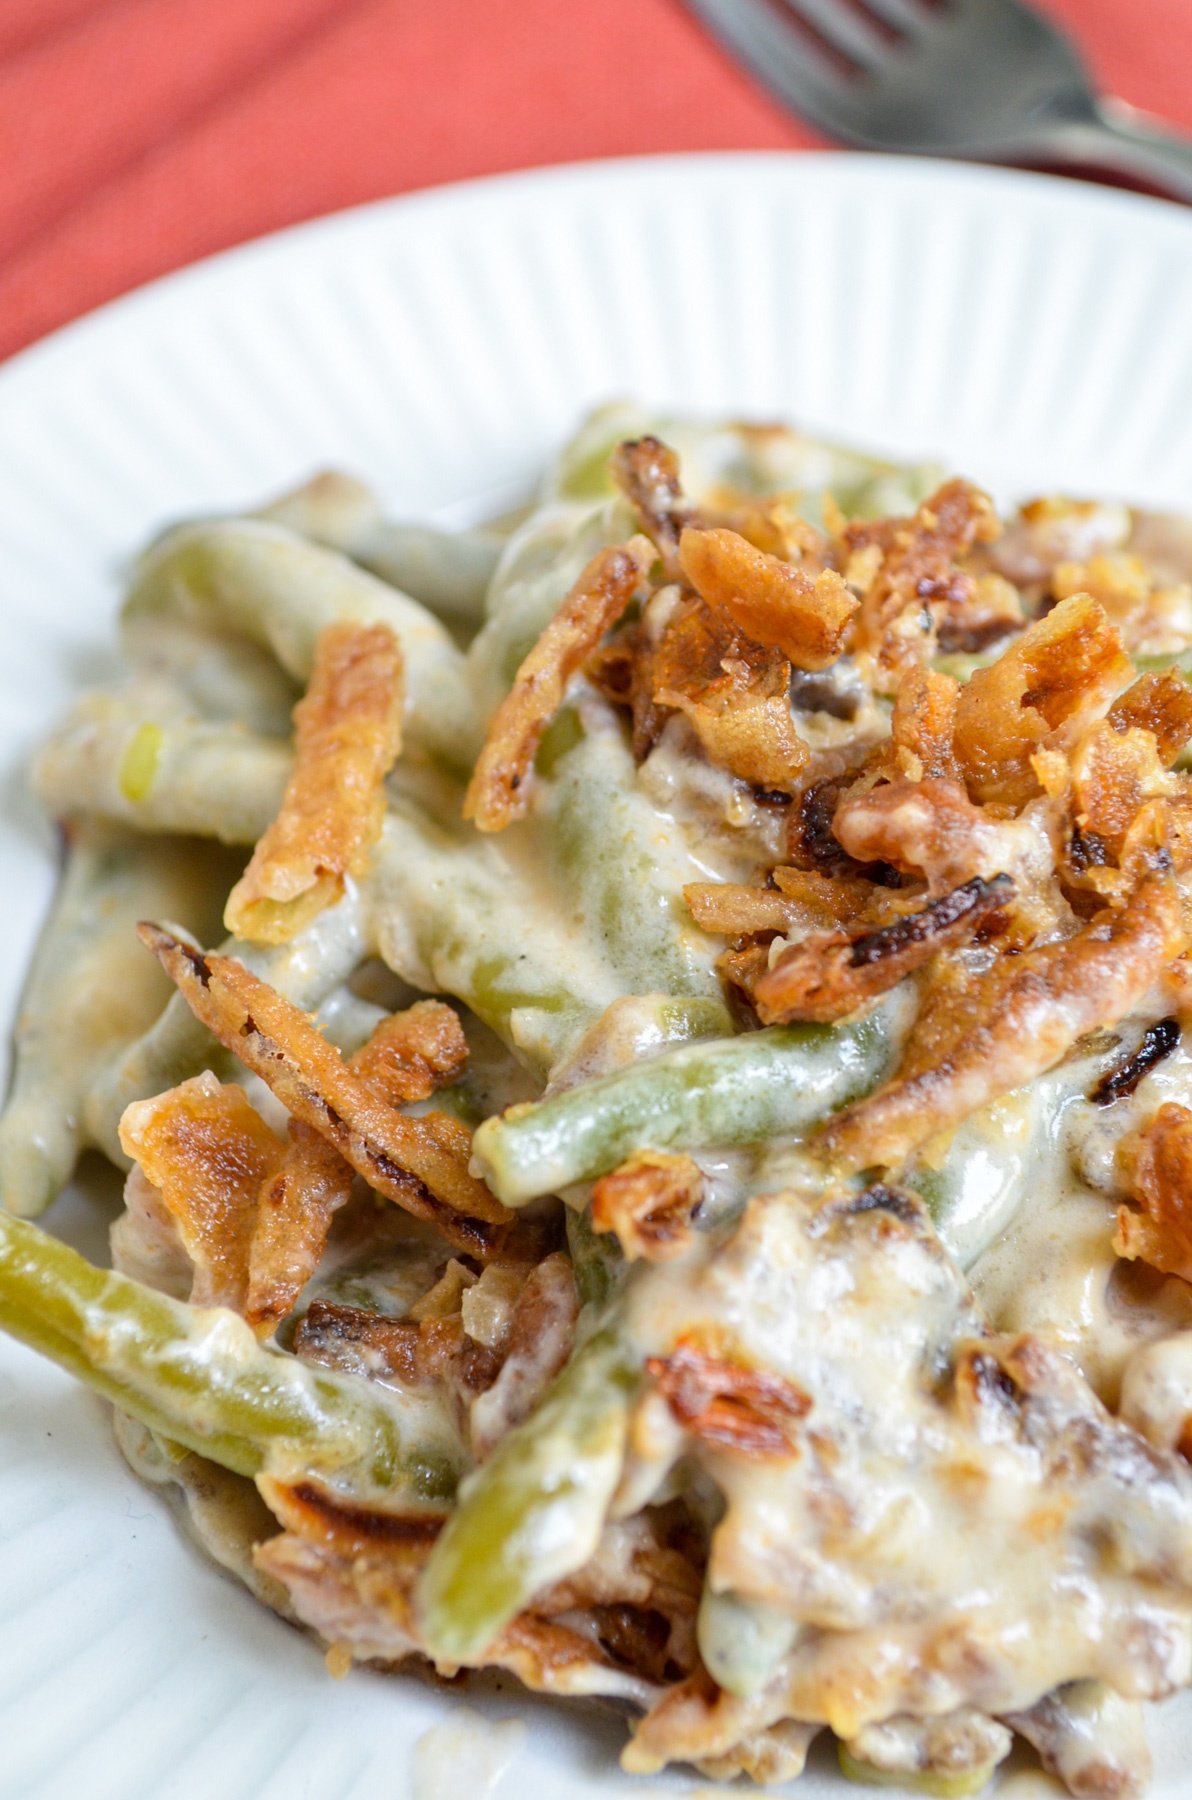 A serving of green bean casserole on a white plate, topped with french fried onions.